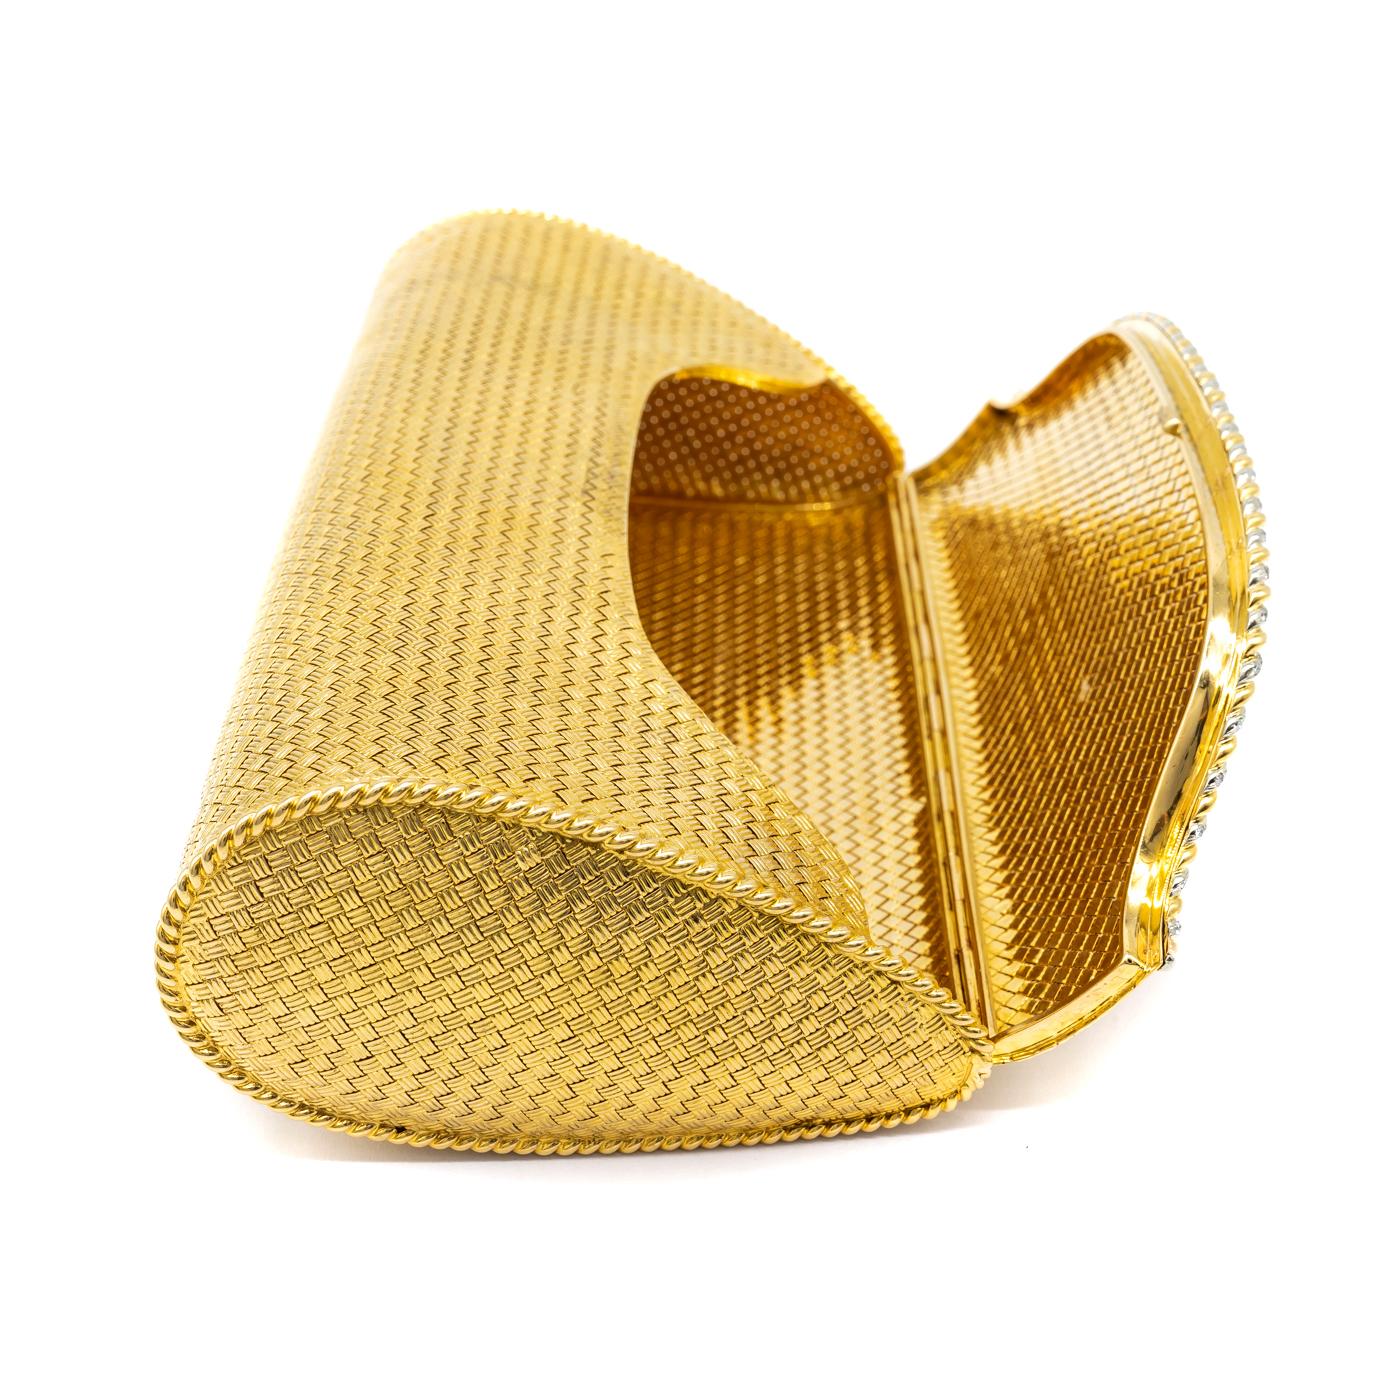 A vintage, Tiffany & Co., 18ct woven gold evening bag, with round brilliant-cut diamonds, set in a braid style twist, along the opening, signed Tiffany & Co., circa 1950.